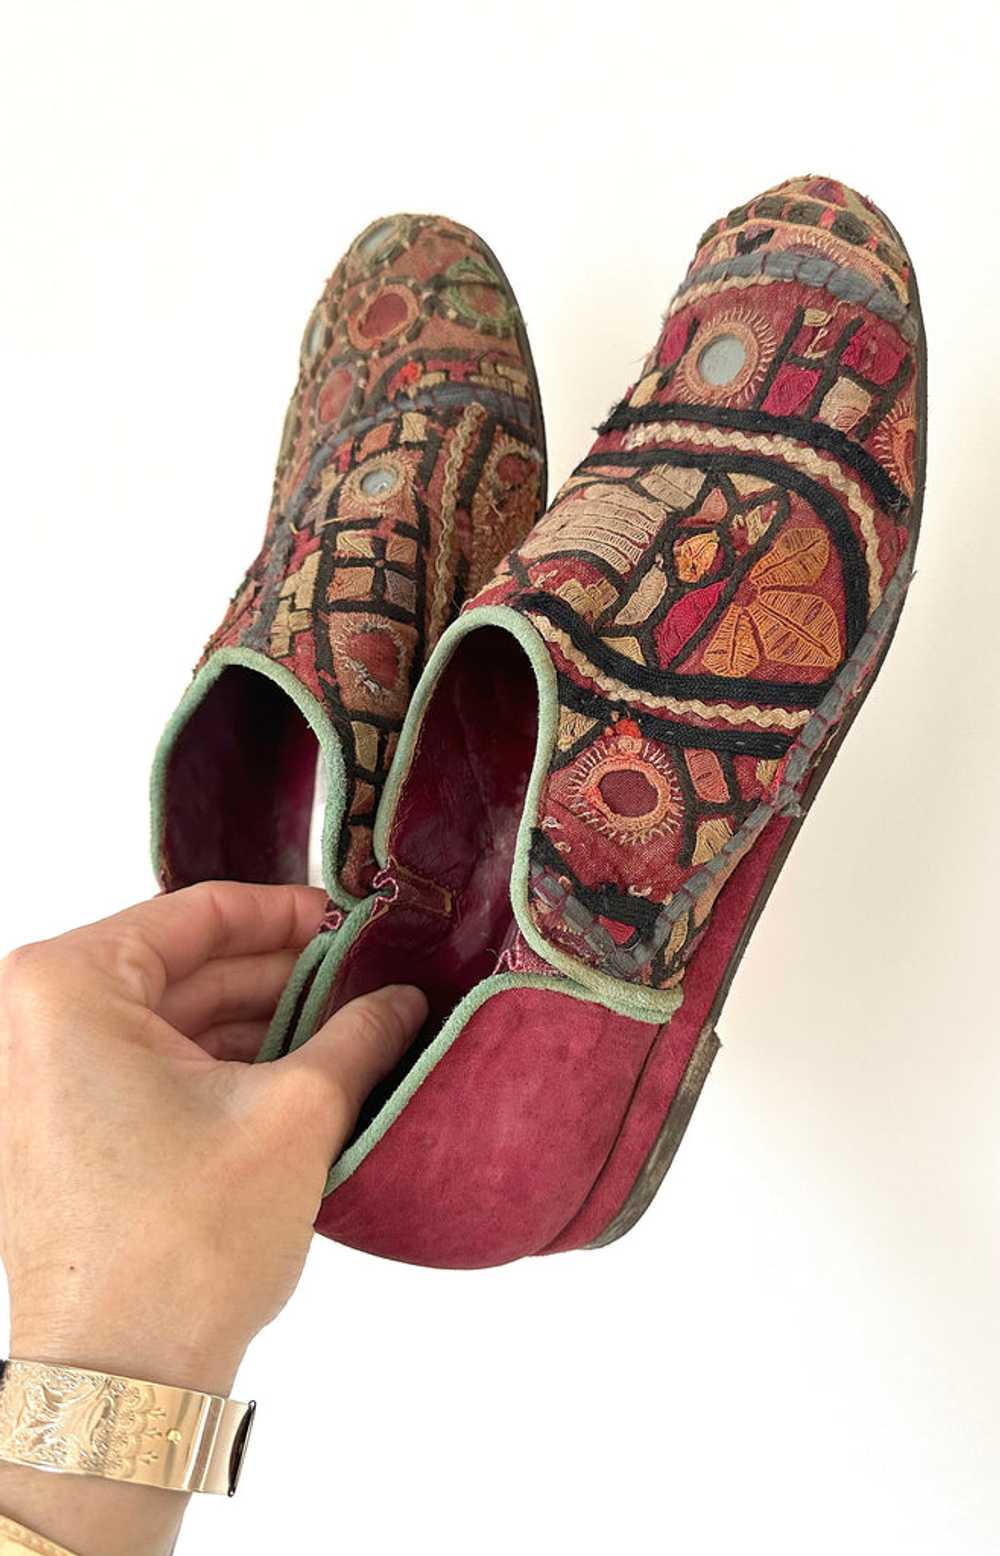 Embroidered Shoes / 1980s / Wounded Birds - image 2